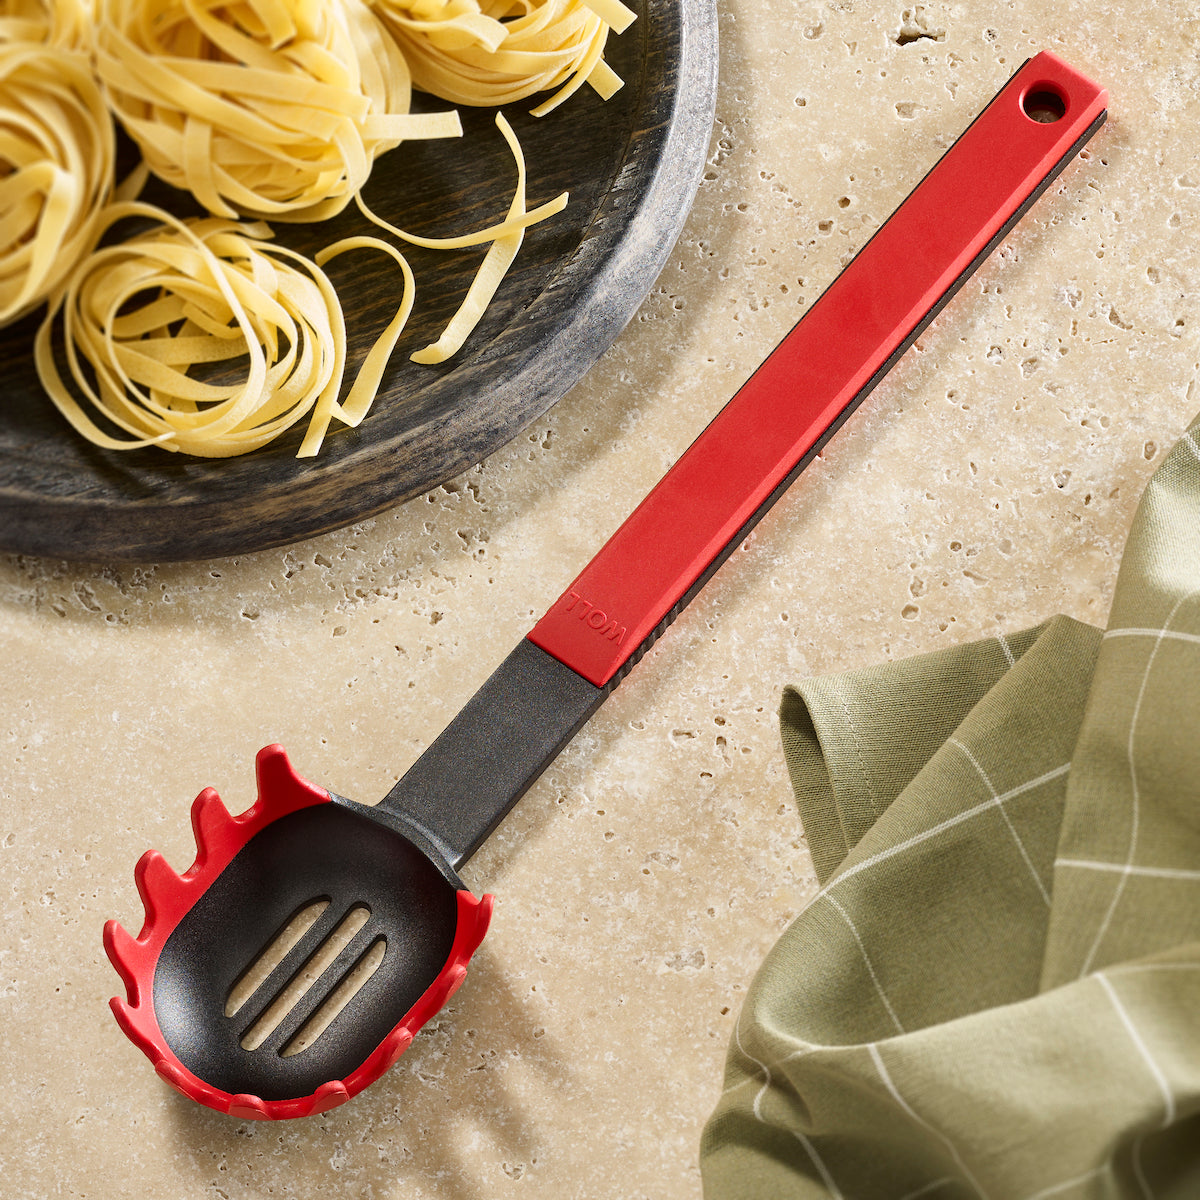 Woll™ 'Cook it' Pasta Server